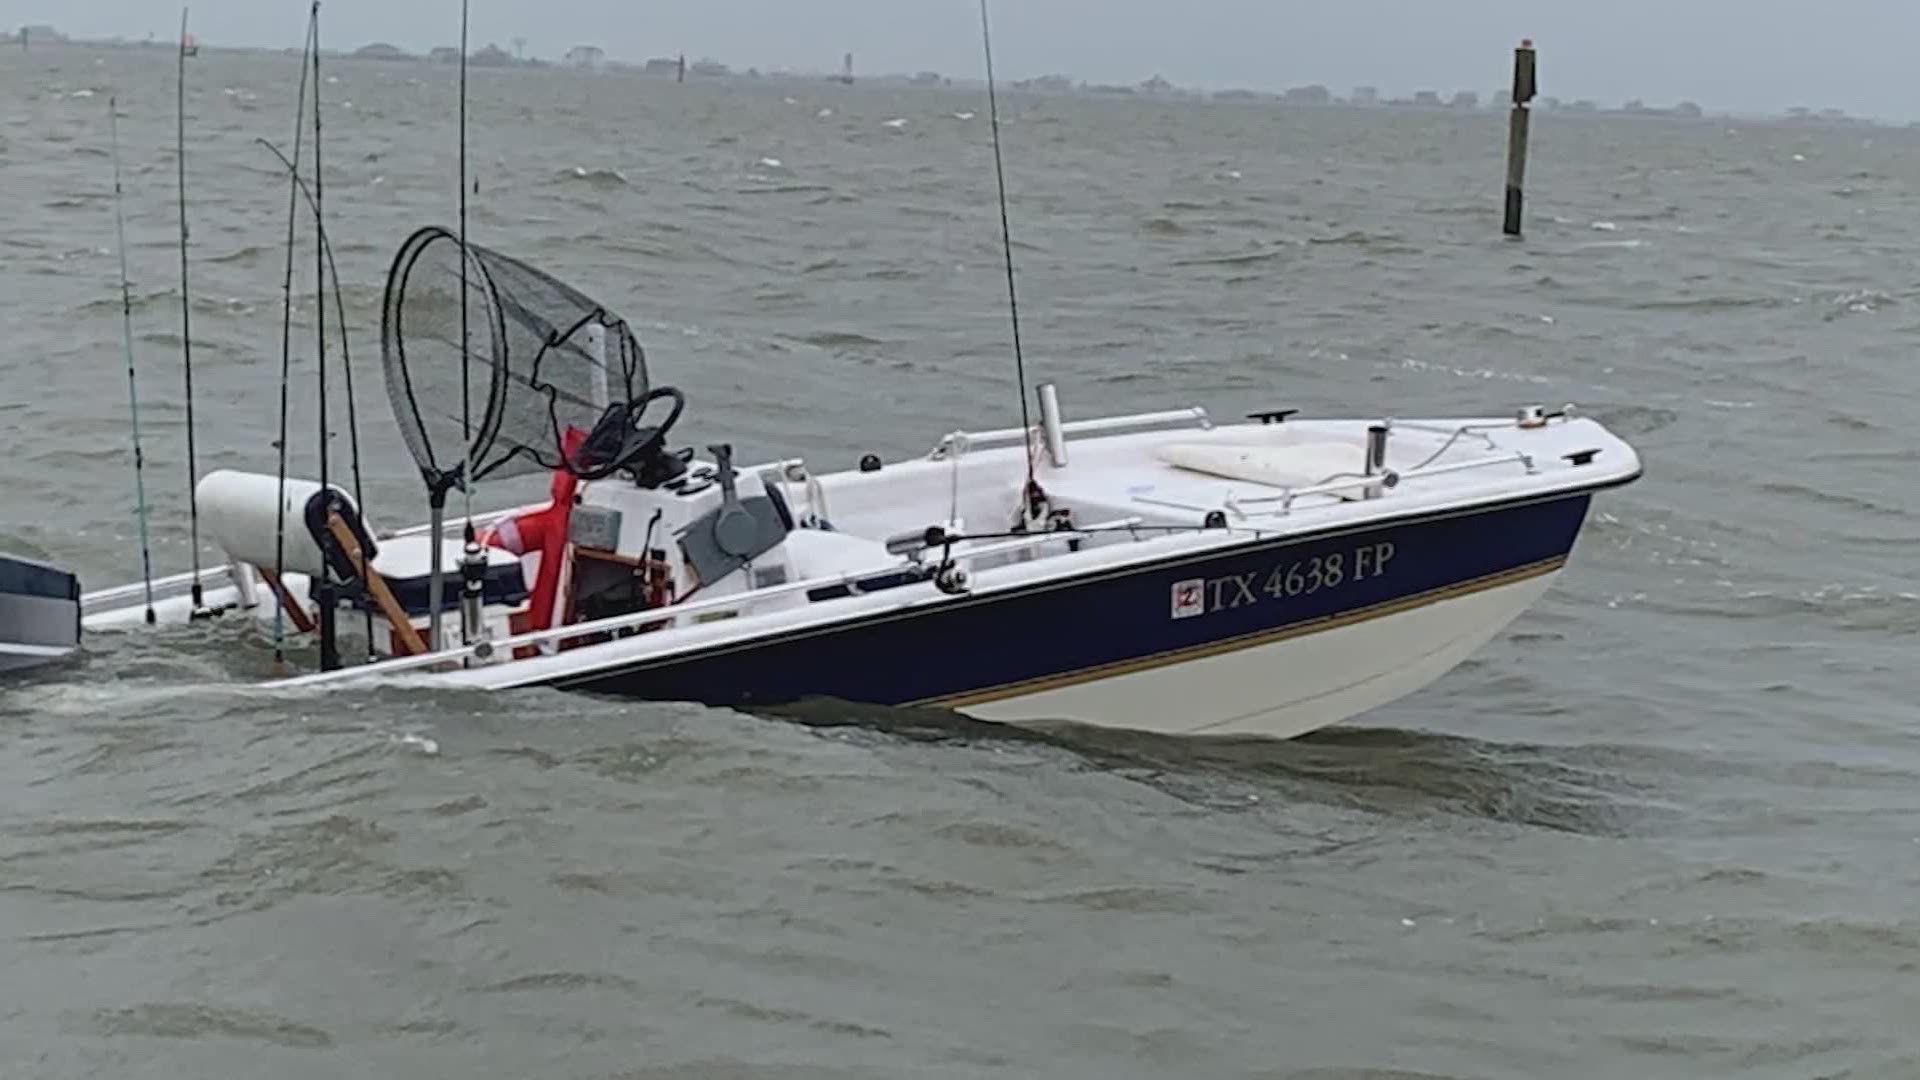 The U.S. Coast Guard is still searching for two boaters who went missing Friday in Galveston. A strong storm blew in and their boat started taking on water.